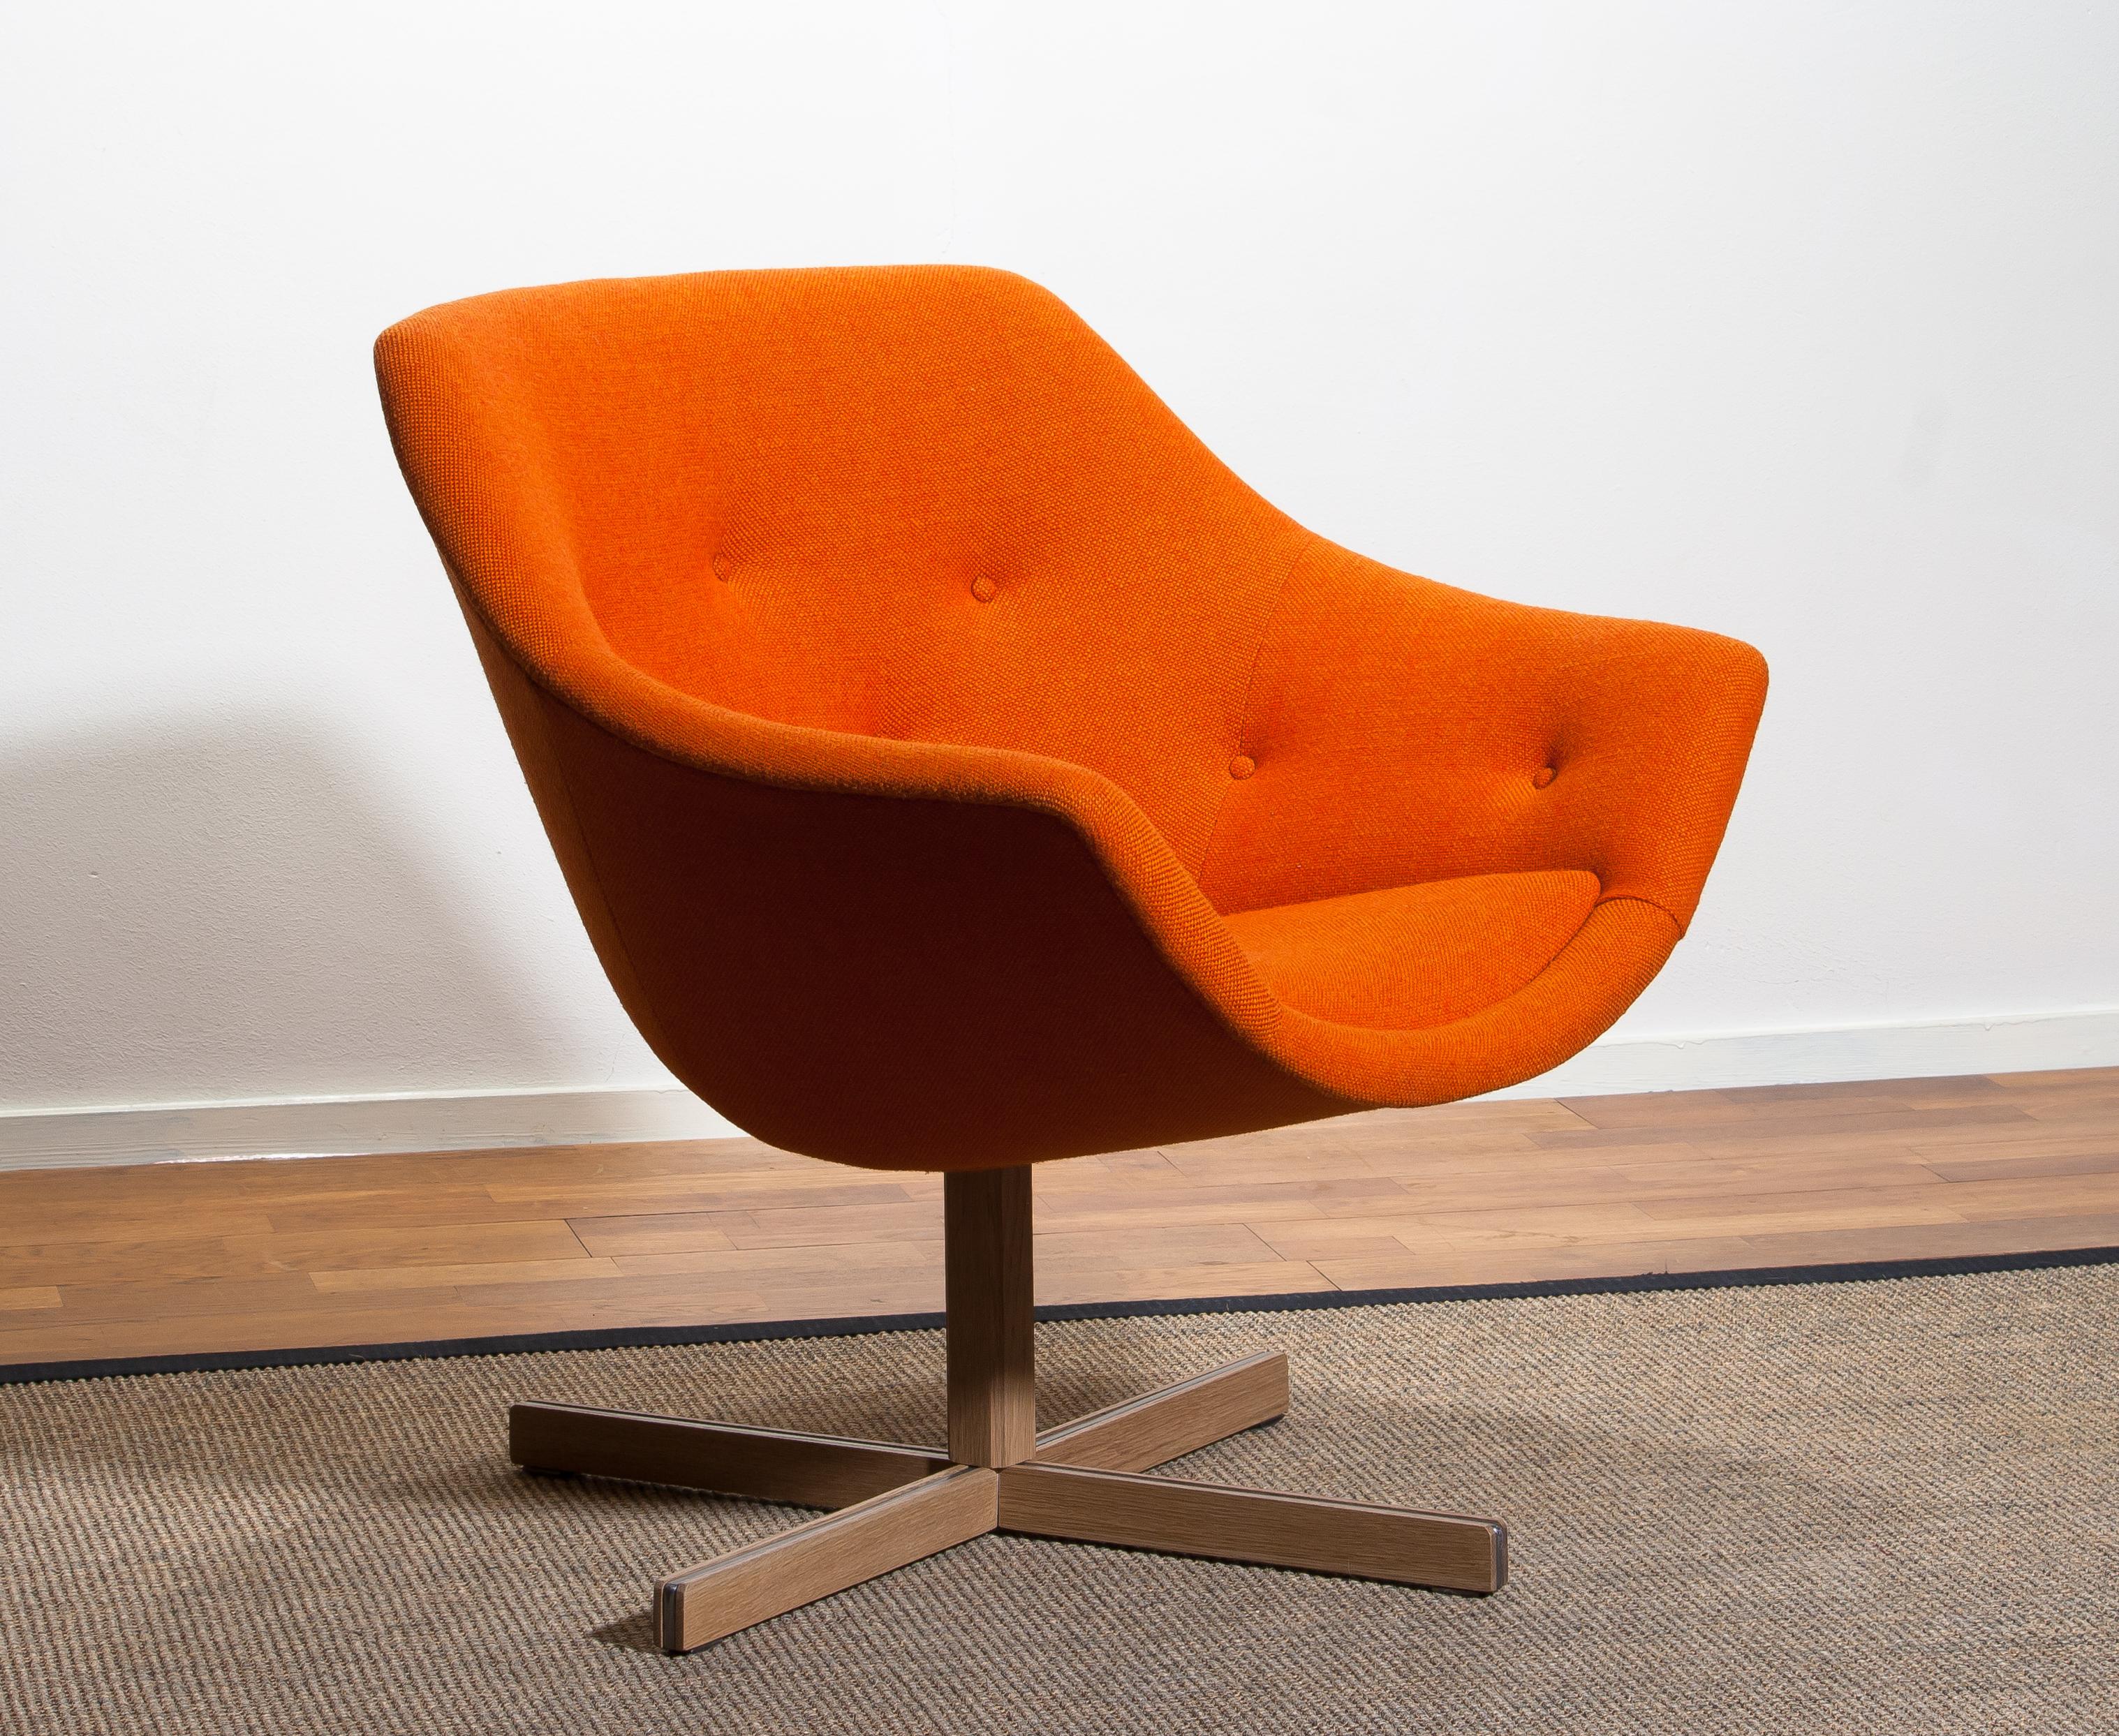 Fantastic 'Mandarini' swivel armchair made by Carl Gustaf Hiort for Puunveisto Oy, wood work Ltd. This chair is upholstered with a buttoned orange fabric 'Hallingdal' by Kvadrat designed by Nanna Ditzel, on an oak swivel base.
It is in perfect and